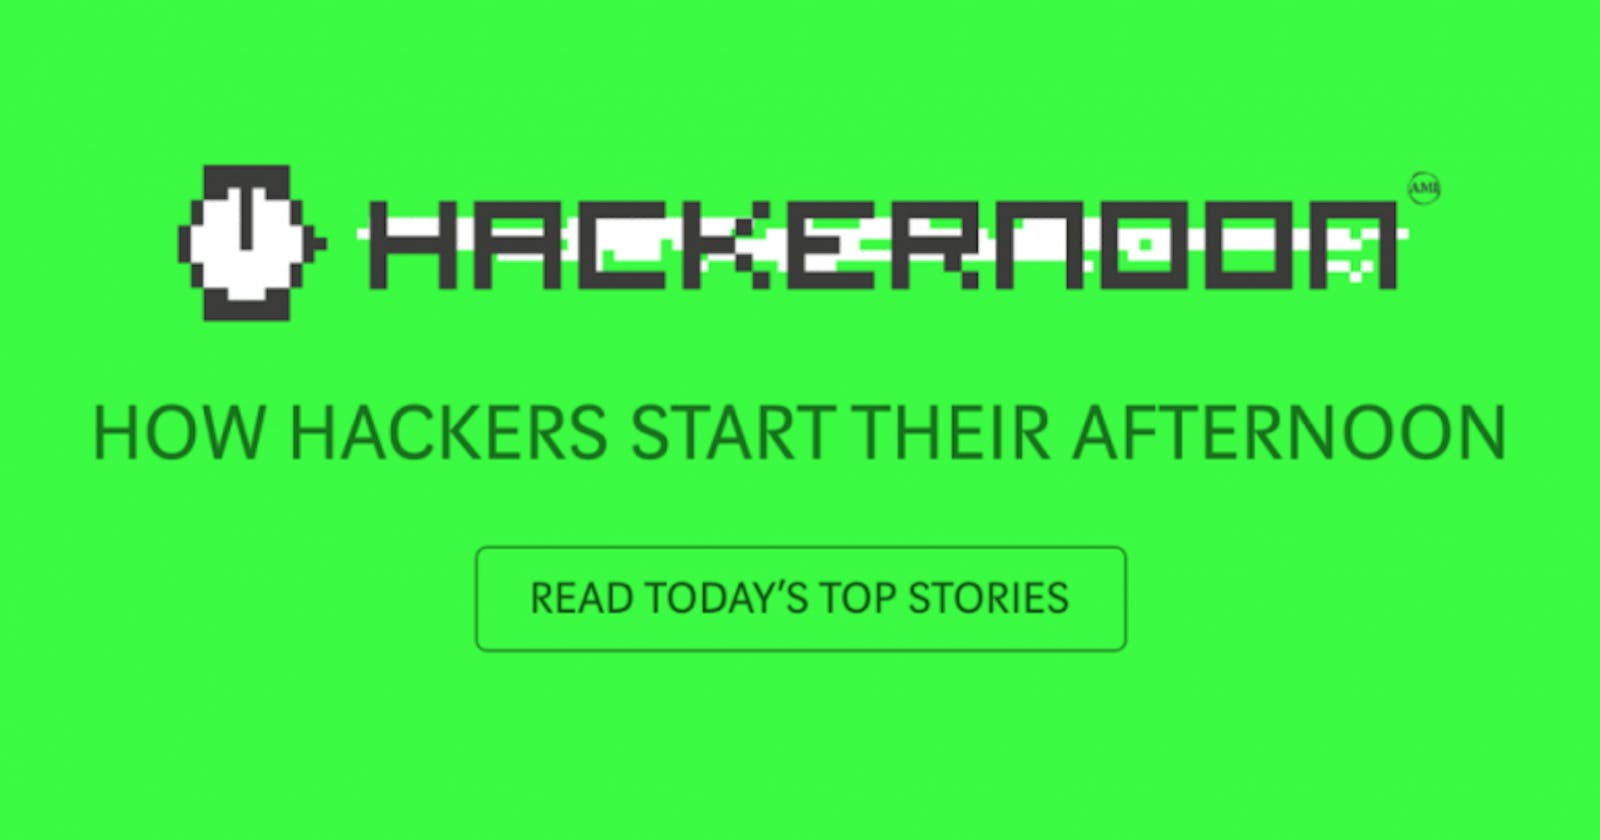 🚀 Hacker Noon 2.0 published my content 🚀